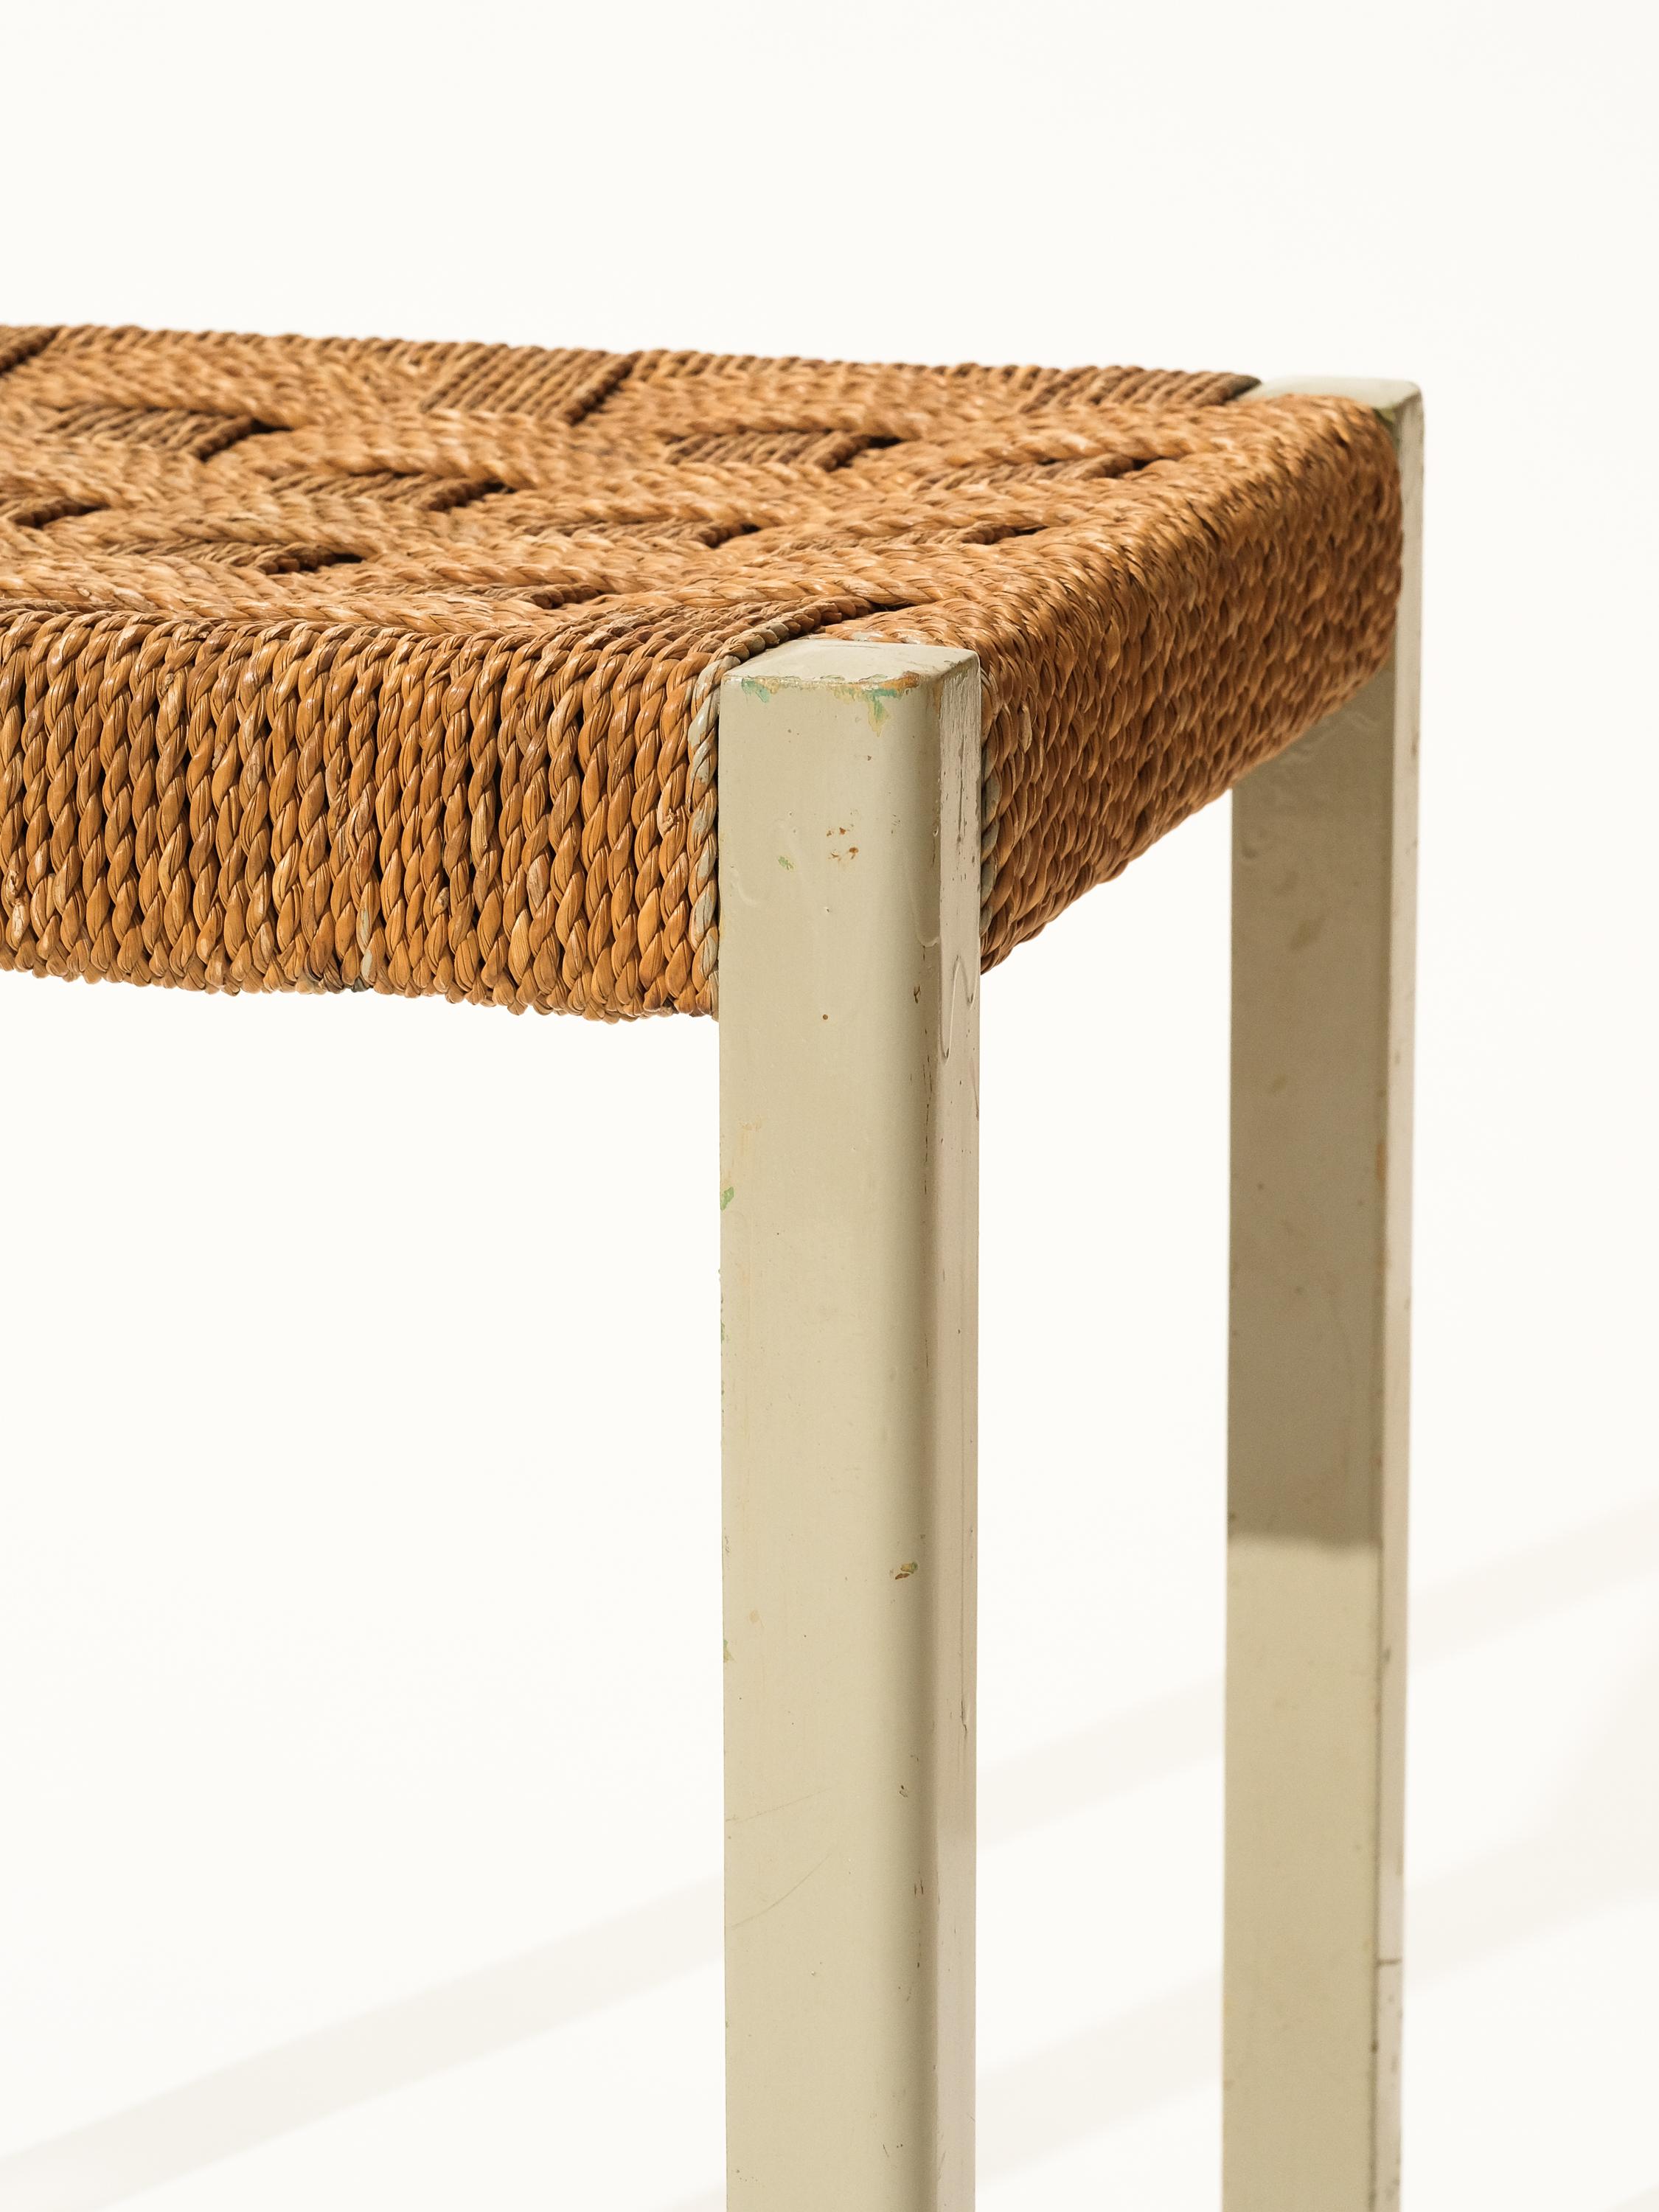 Swedish Woven Seagrass and Painted Wood Stool by Axel Larsson for Gemla, Sweden, 1940s For Sale